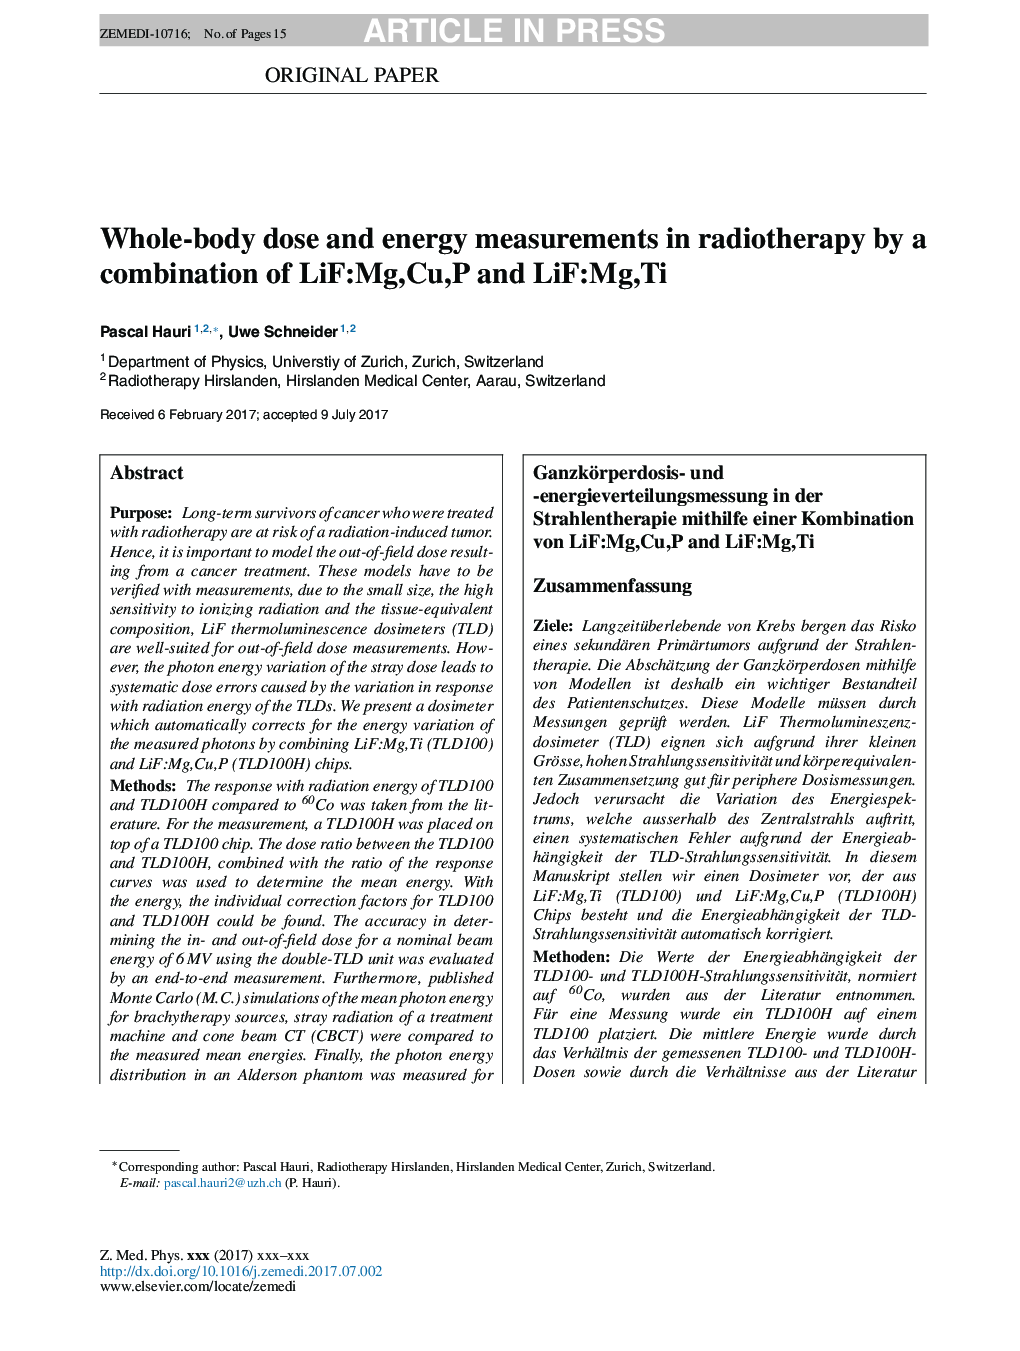 Whole-body dose and energy measurements in radiotherapy by a combination of LiF:Mg,Cu,P and LiF:Mg,Ti